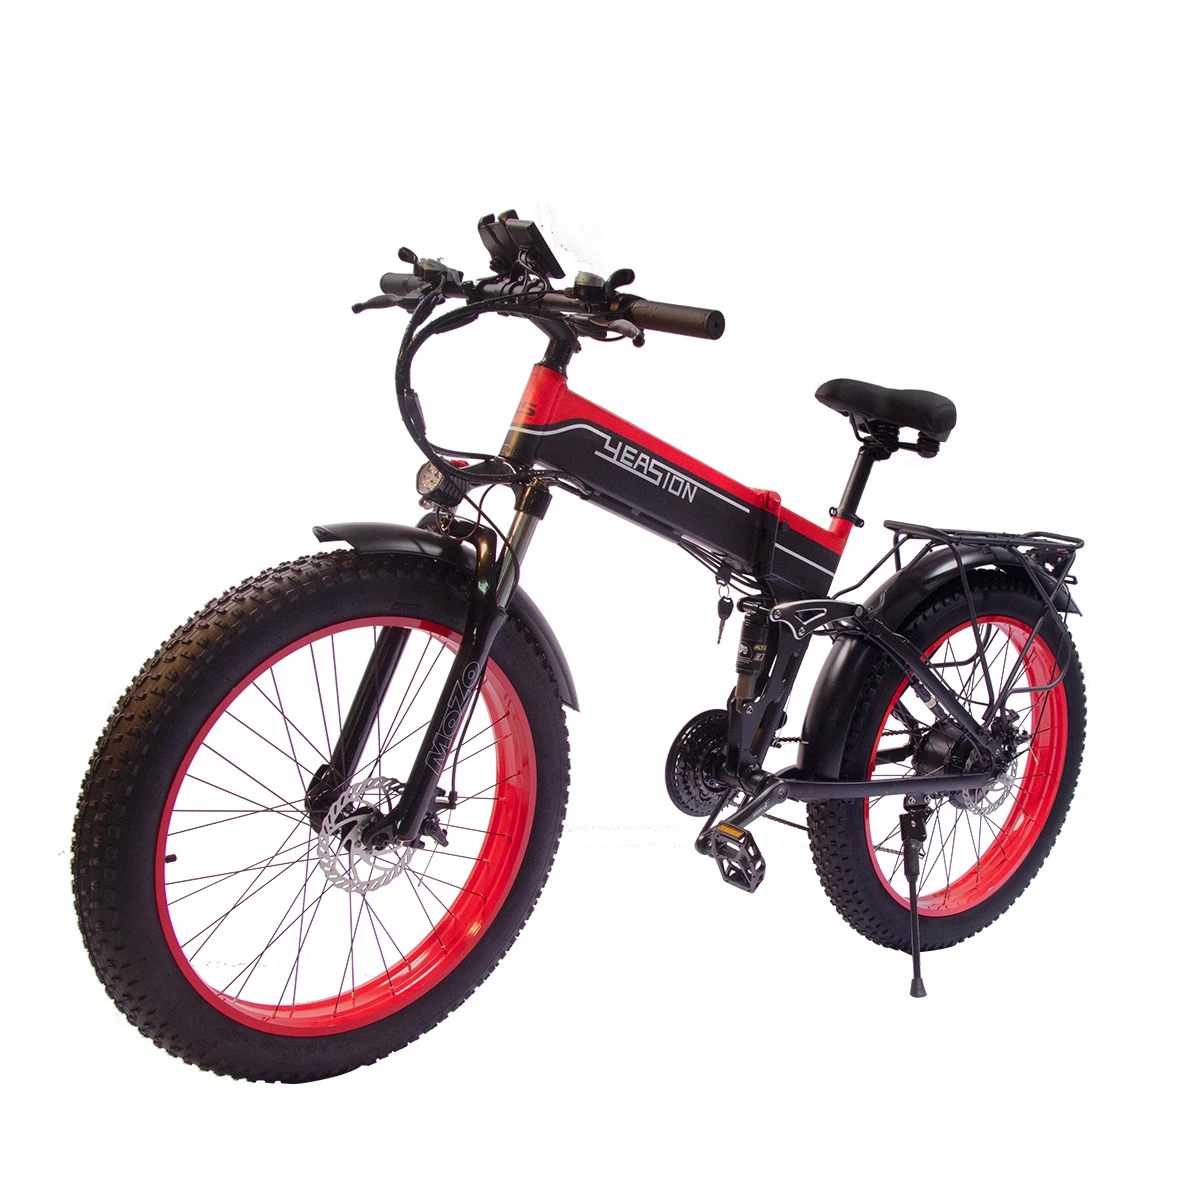 

26"X4.0 Wheel 48V 1000W Motor 14Ah/48V Lithium Battery Free shipping Fat Tire Electric Bicycle Folding Electric Bike